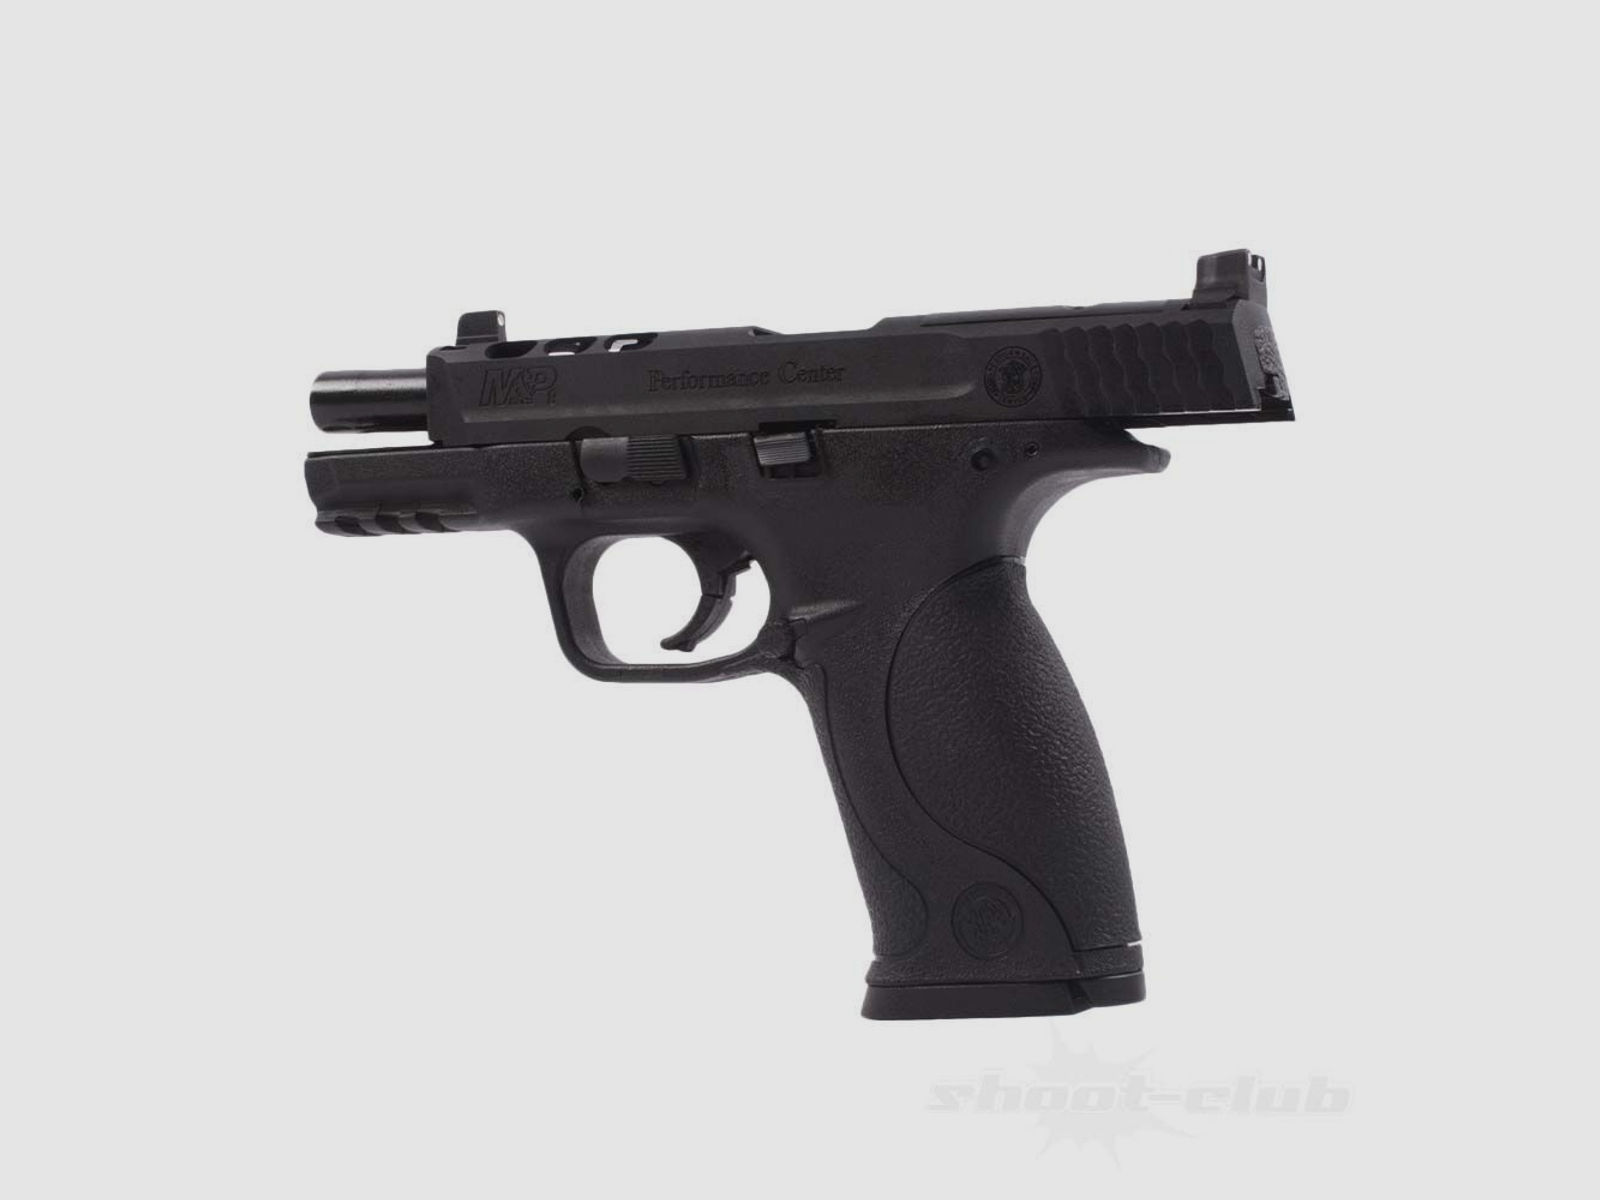 Smith & Wesson M&P9 Performance Center Airsoft GBB Pistole ab 18